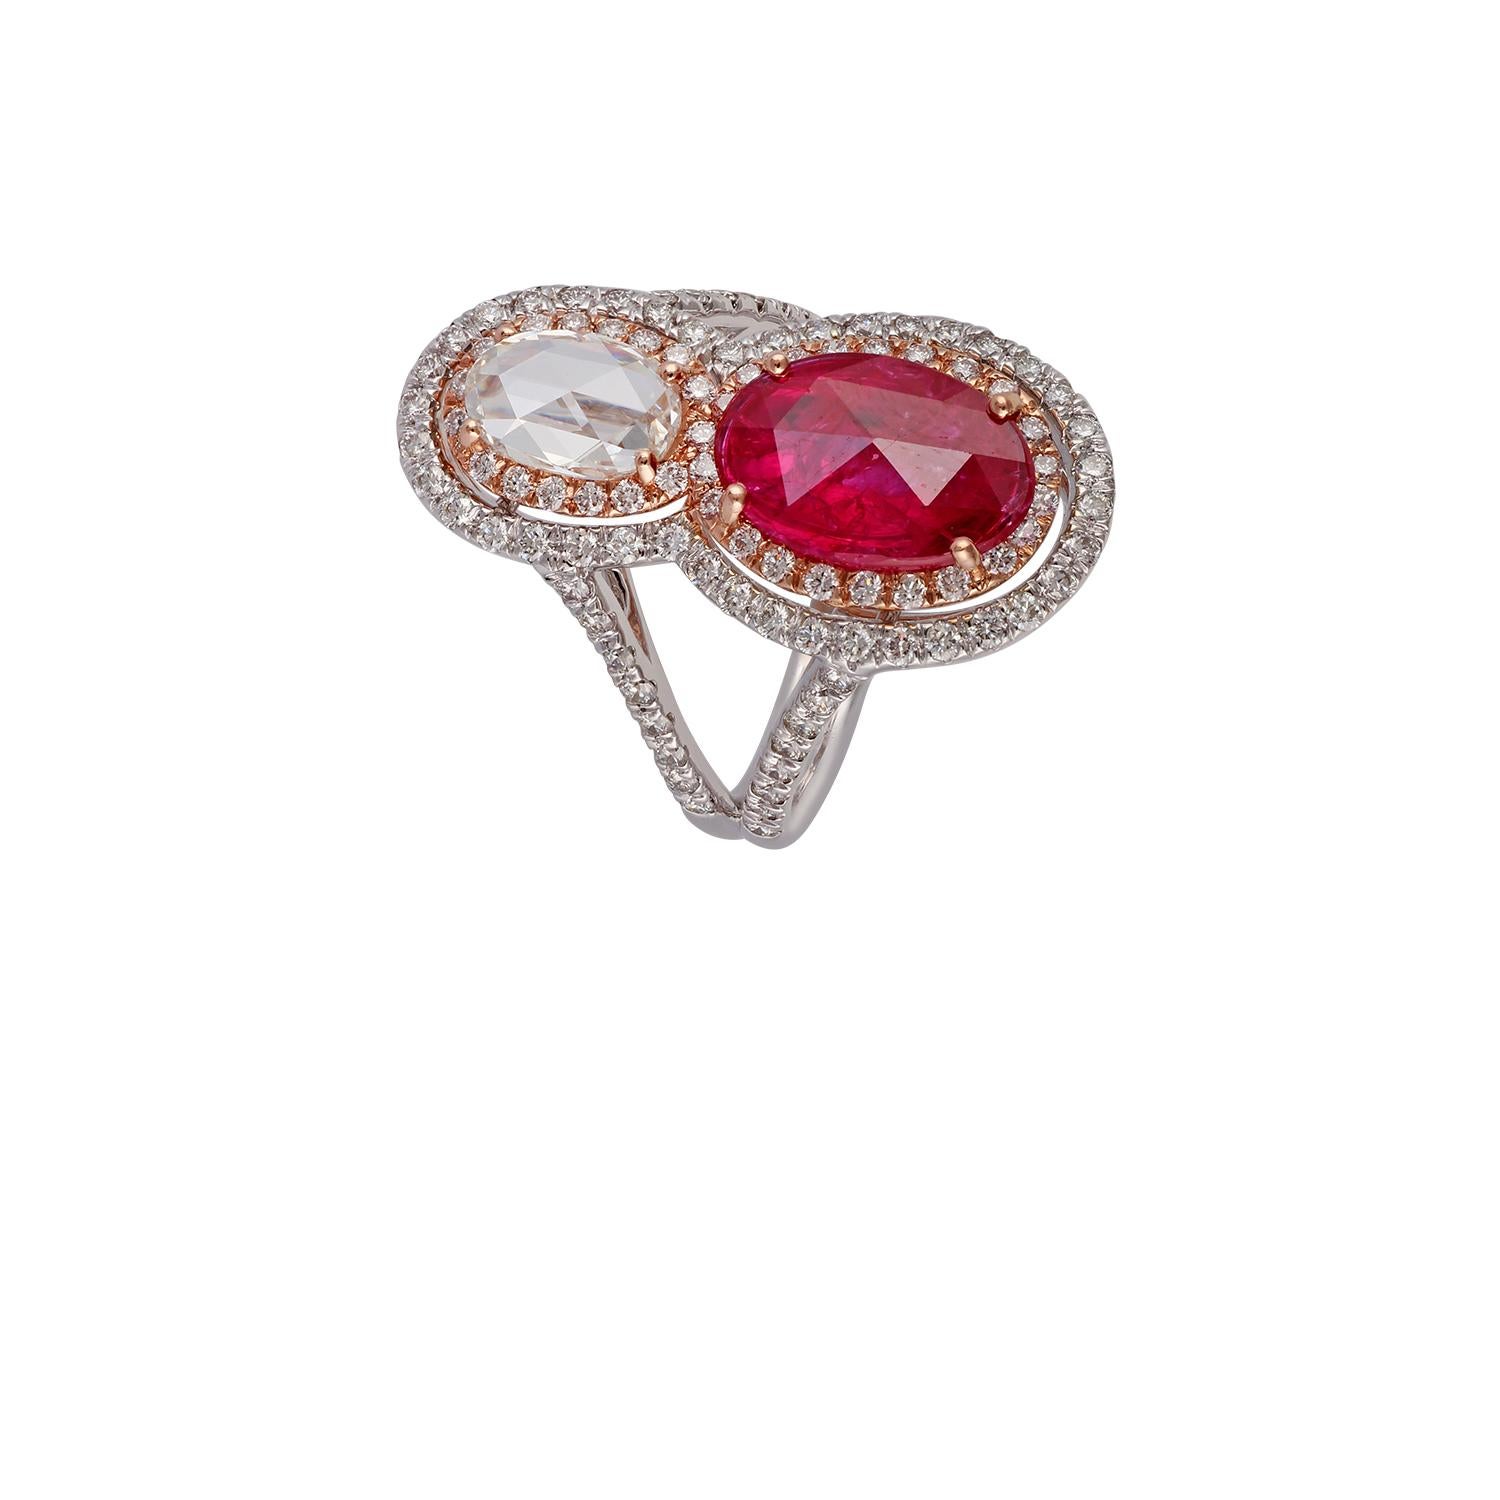 Contemporary 2.09 Carat Ruby and Diamond Ring Studded in 18 Karat White Gold For Sale